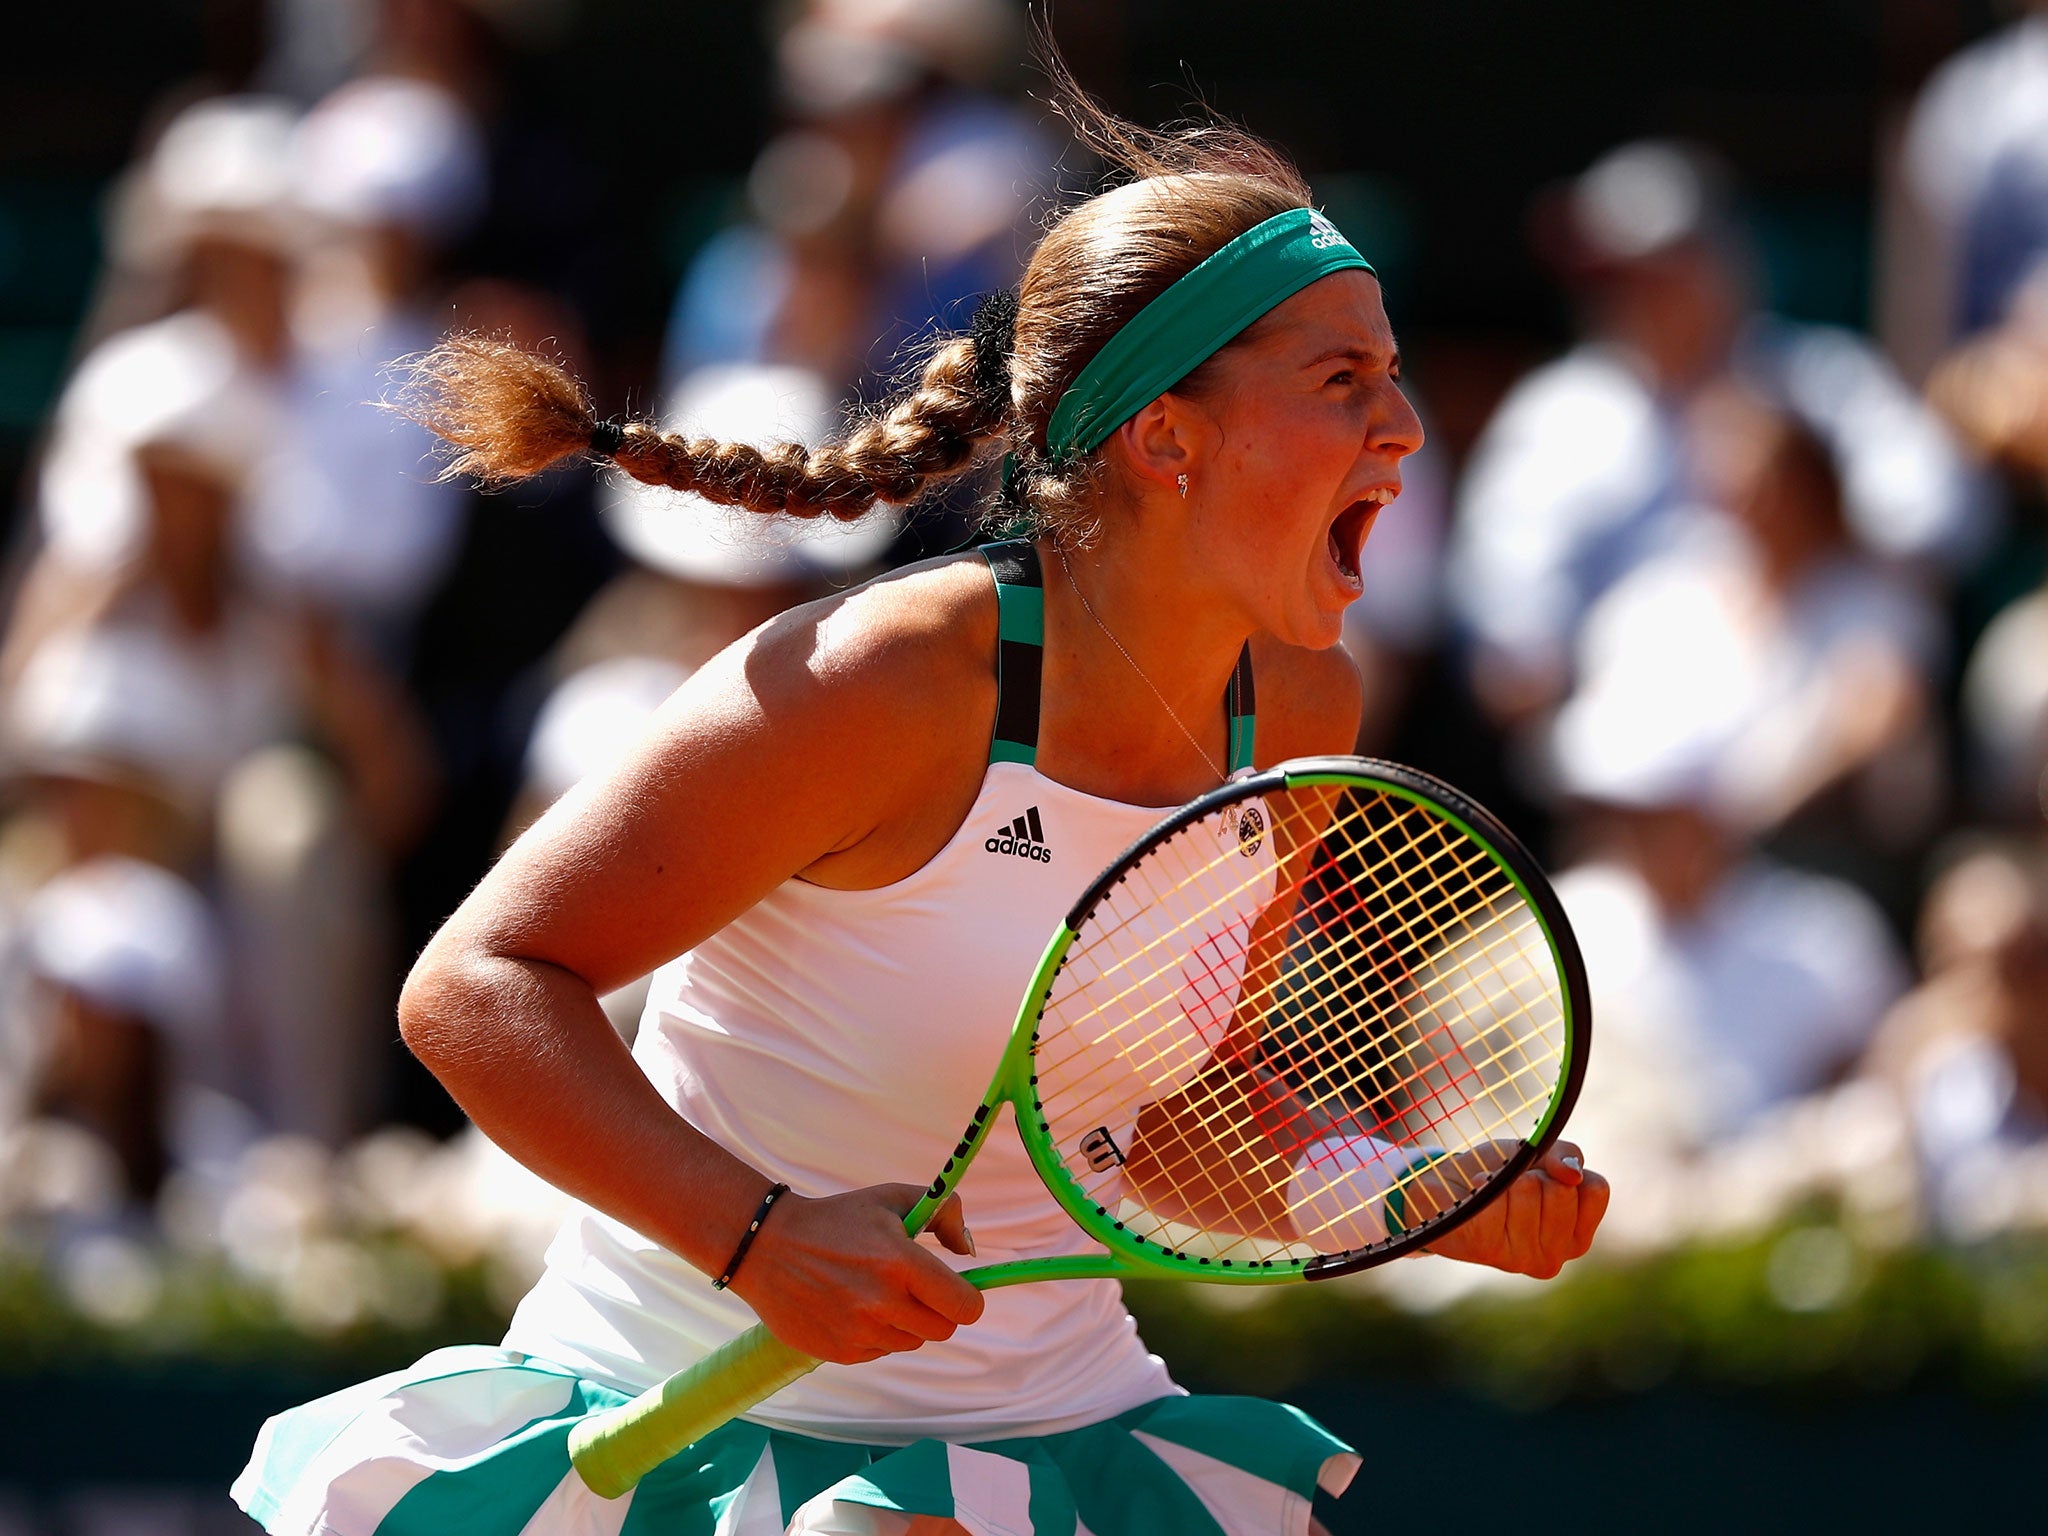 Jelena Ostapenko made history in beating Simona Halep in last year’s French Open final